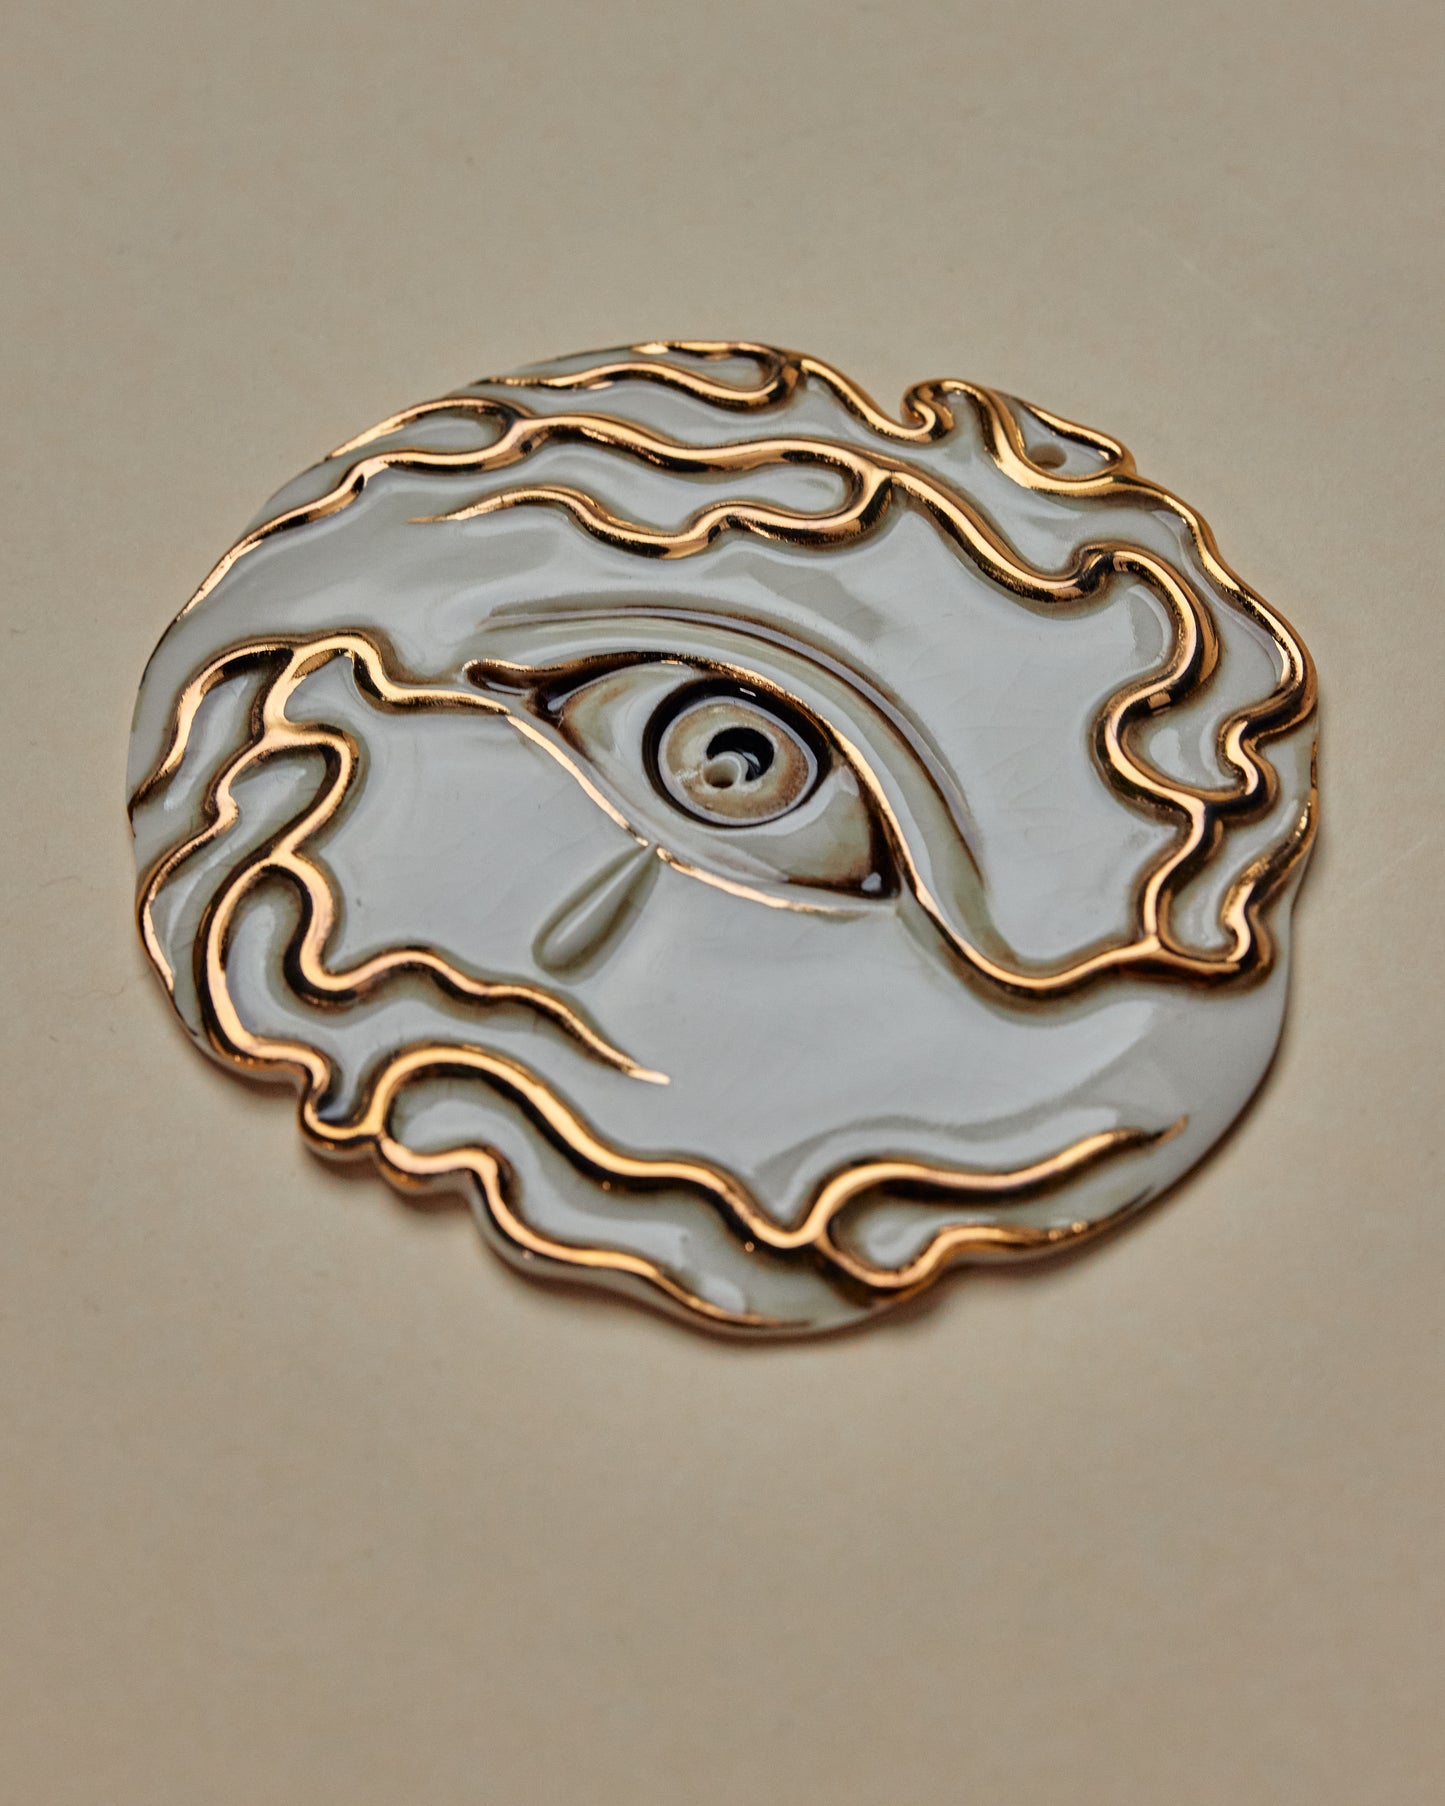 Flaming Eye Incense Holder / Wall Ornament 3 -  Hand crafted Porcelain Home Ornament. Circular ornament with Eye and Flame Border.